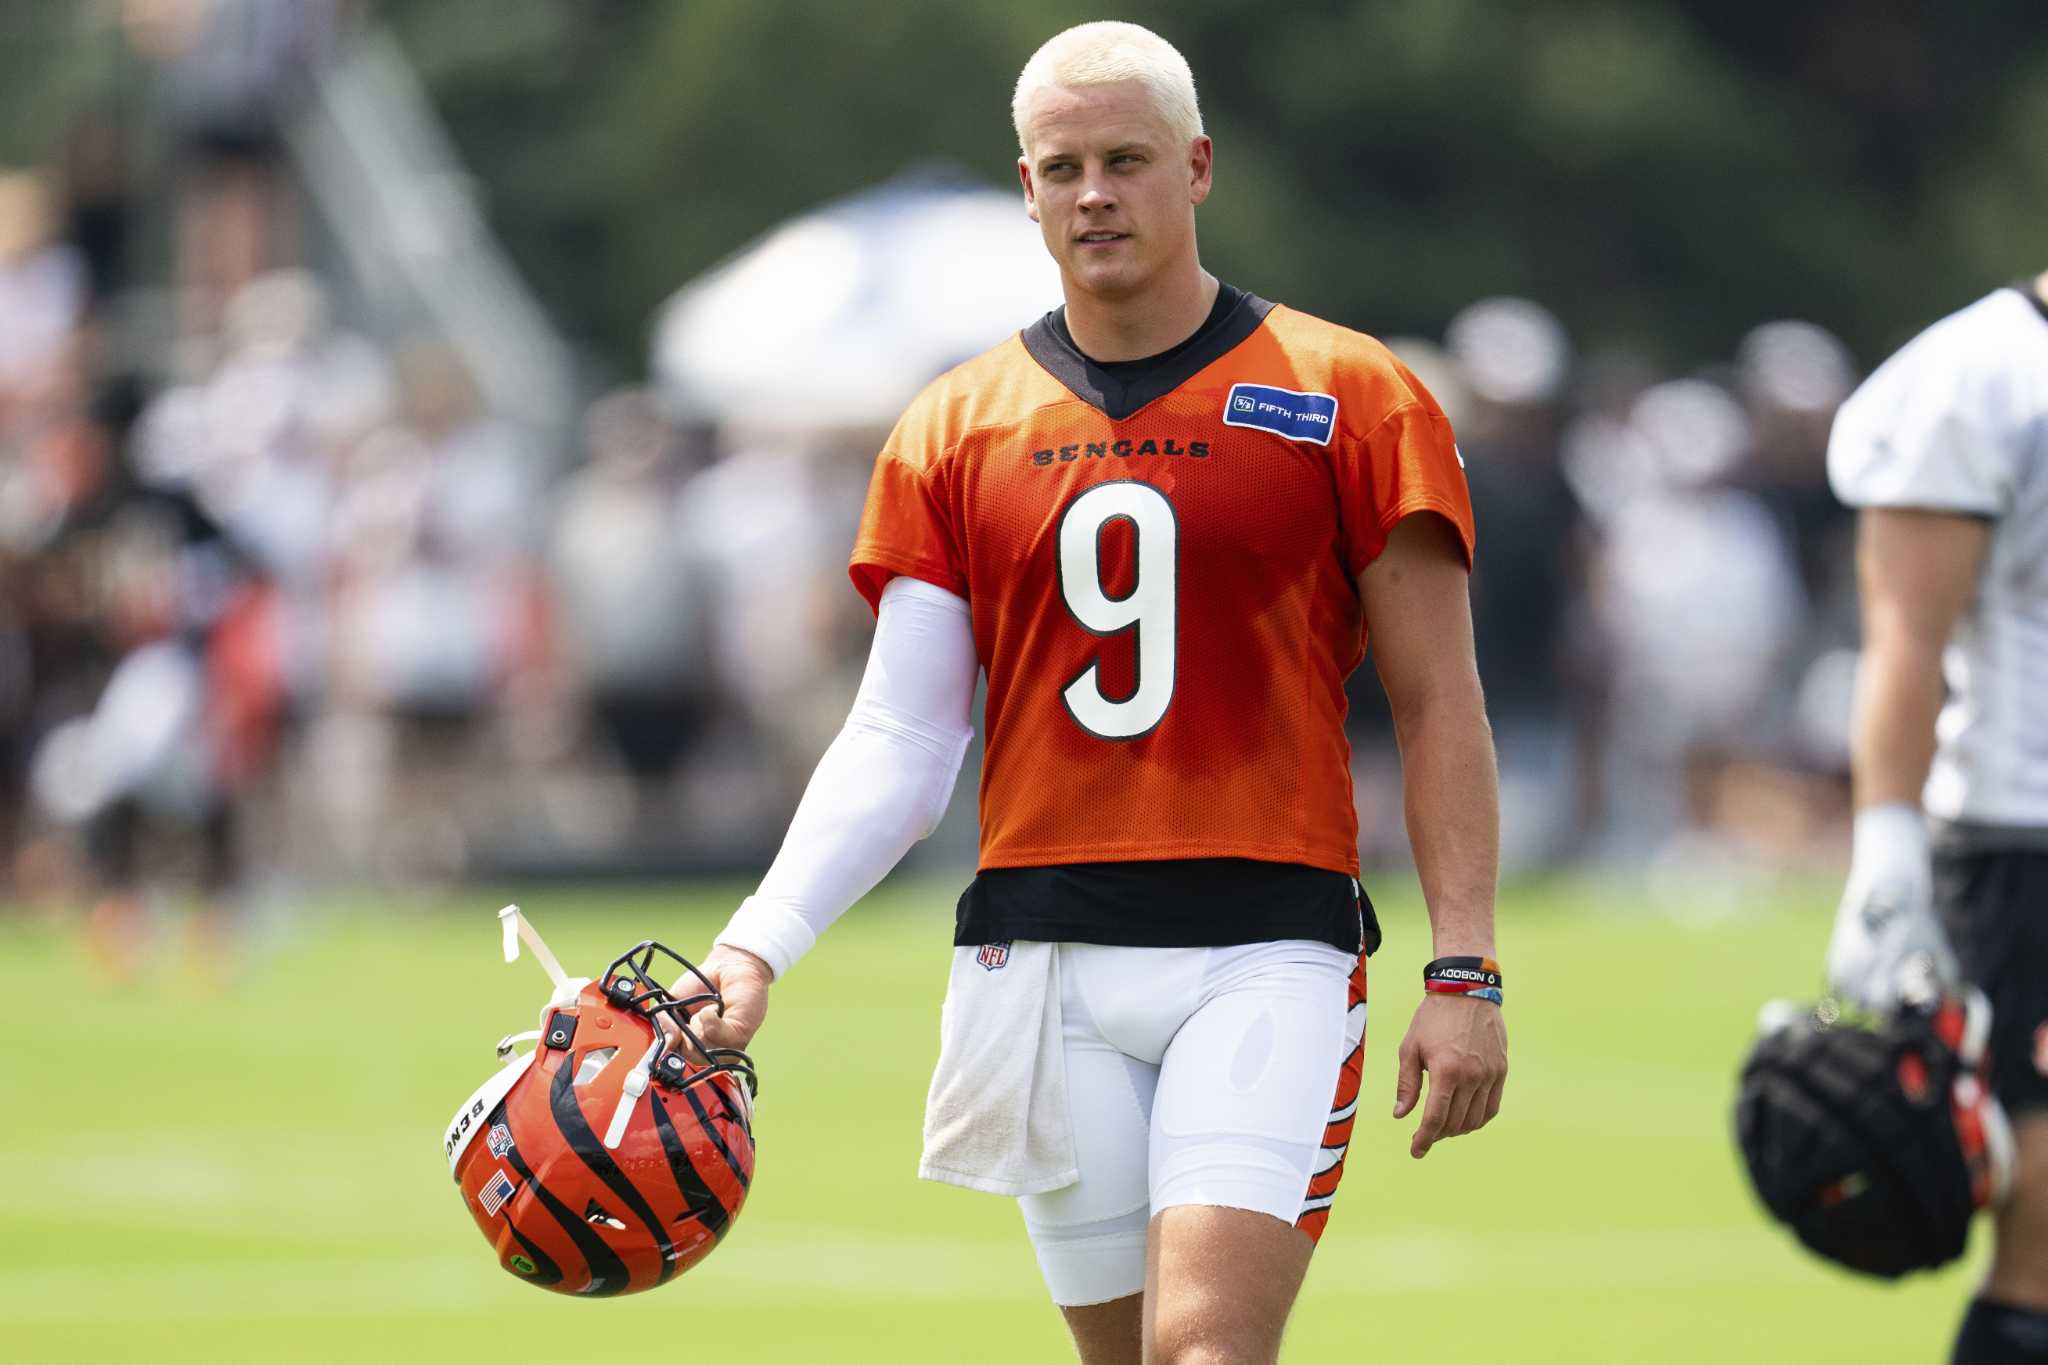 With hair newly cut and dyed, Bengals QB Joe Burrow says his wrist feels good as training camp opens